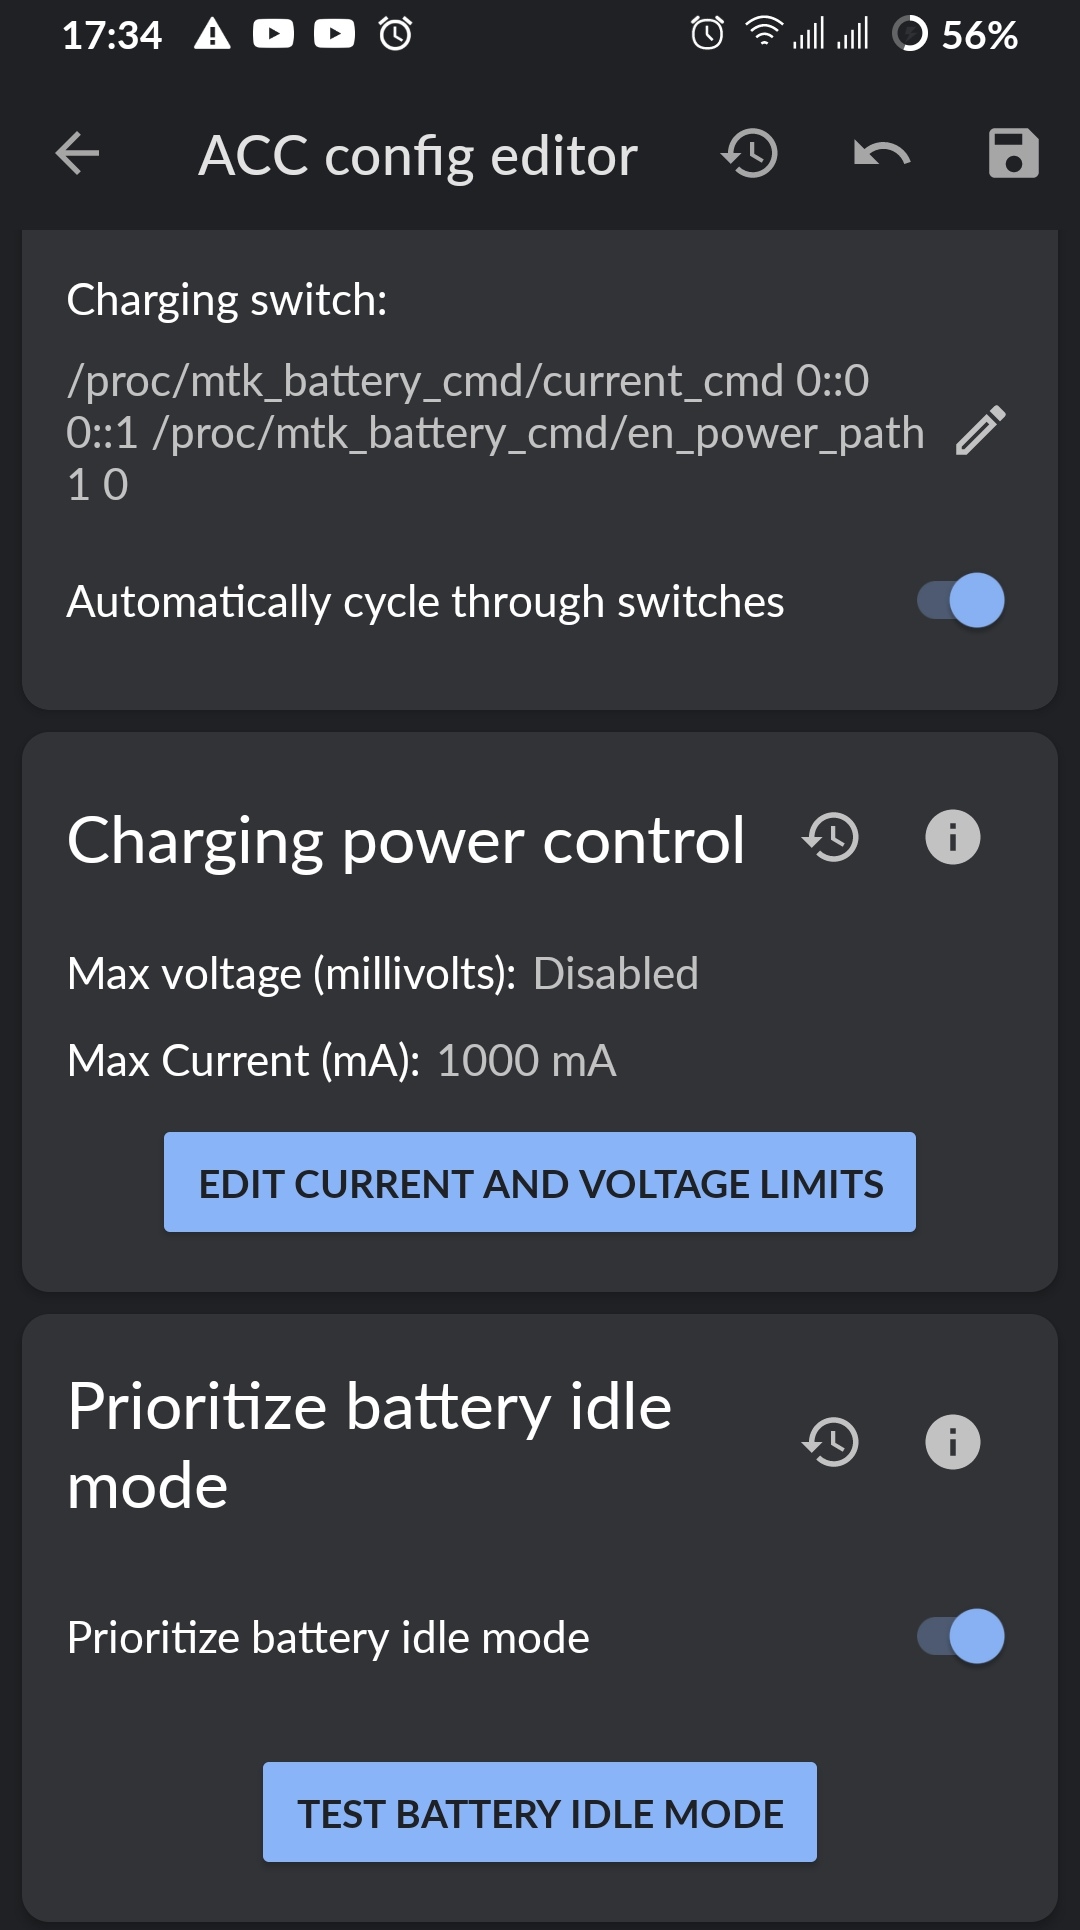 battery-idle-mode-android-phone-acc-acca-config